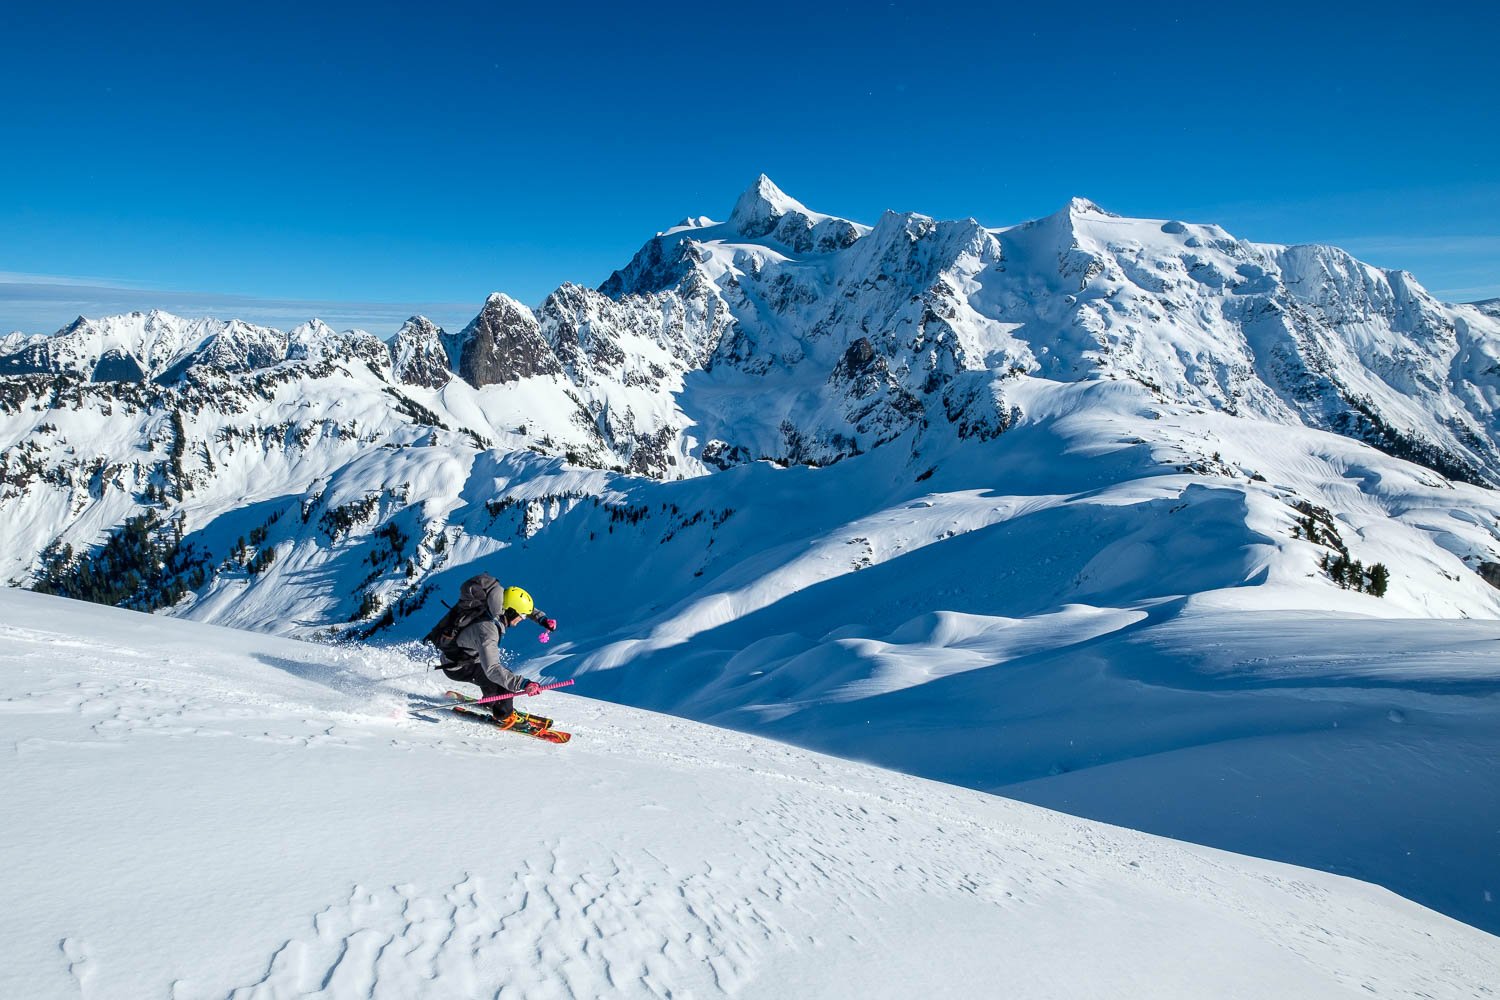  Adam tearin' it up on the blades in the sun with stunning views of Shuksan, January. 